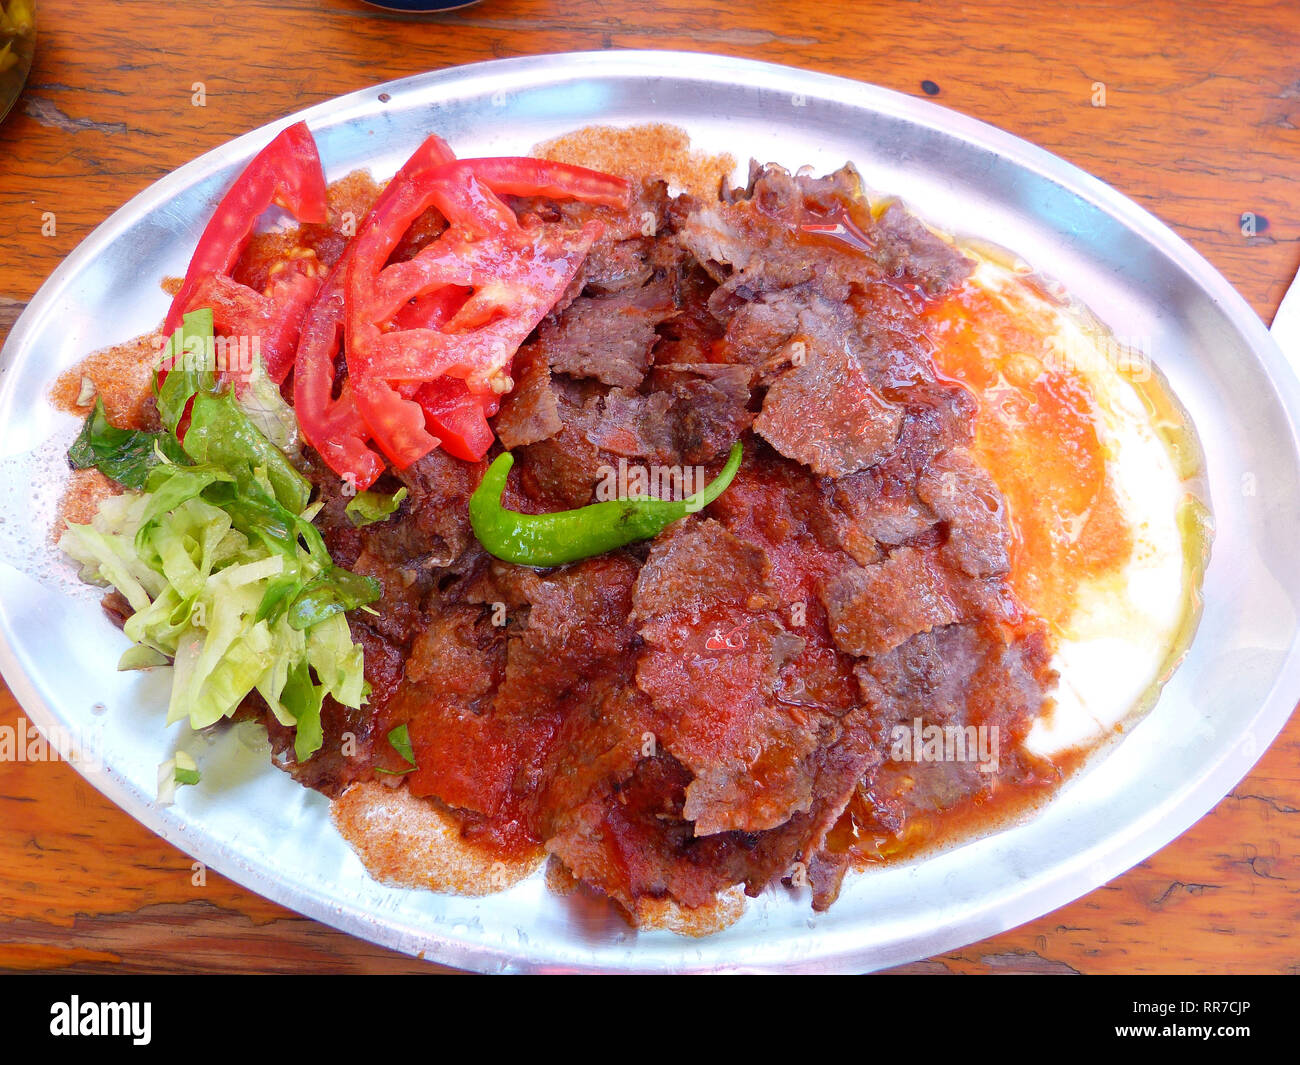 Plate of iskender doner kebap with yoghurt and salad. Stock Photo